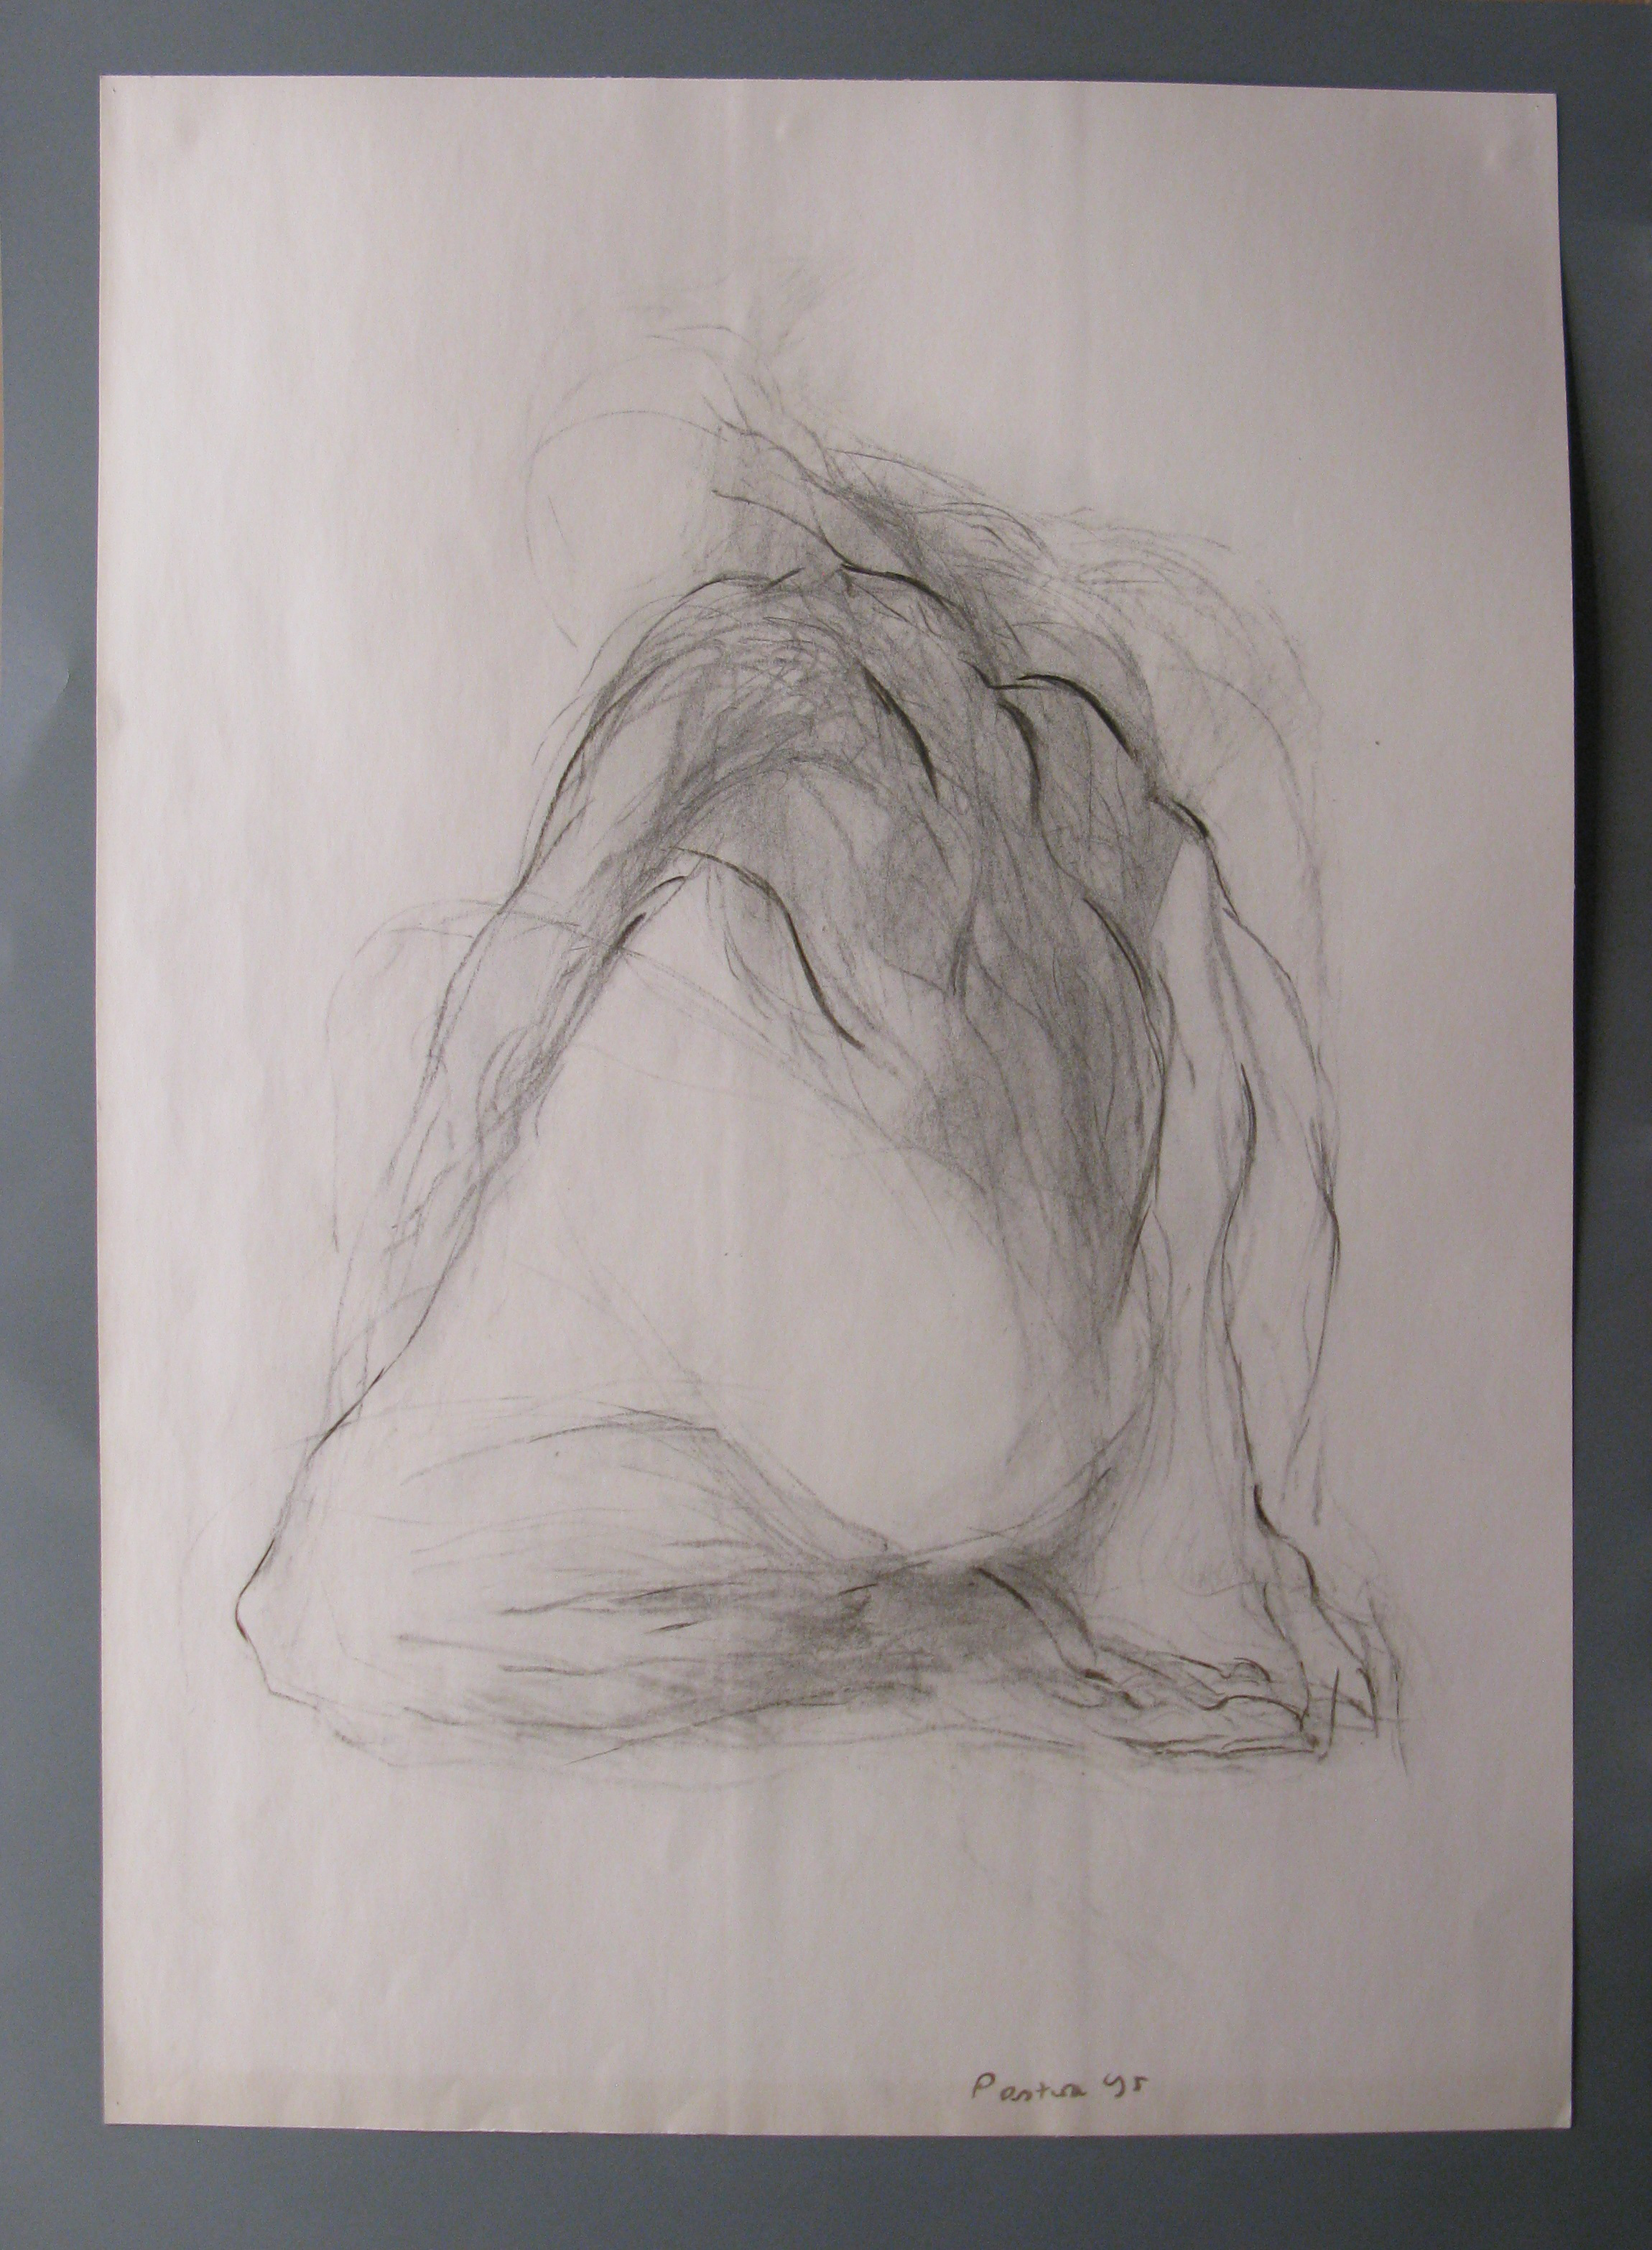 drawing from the cycle "Bodies"